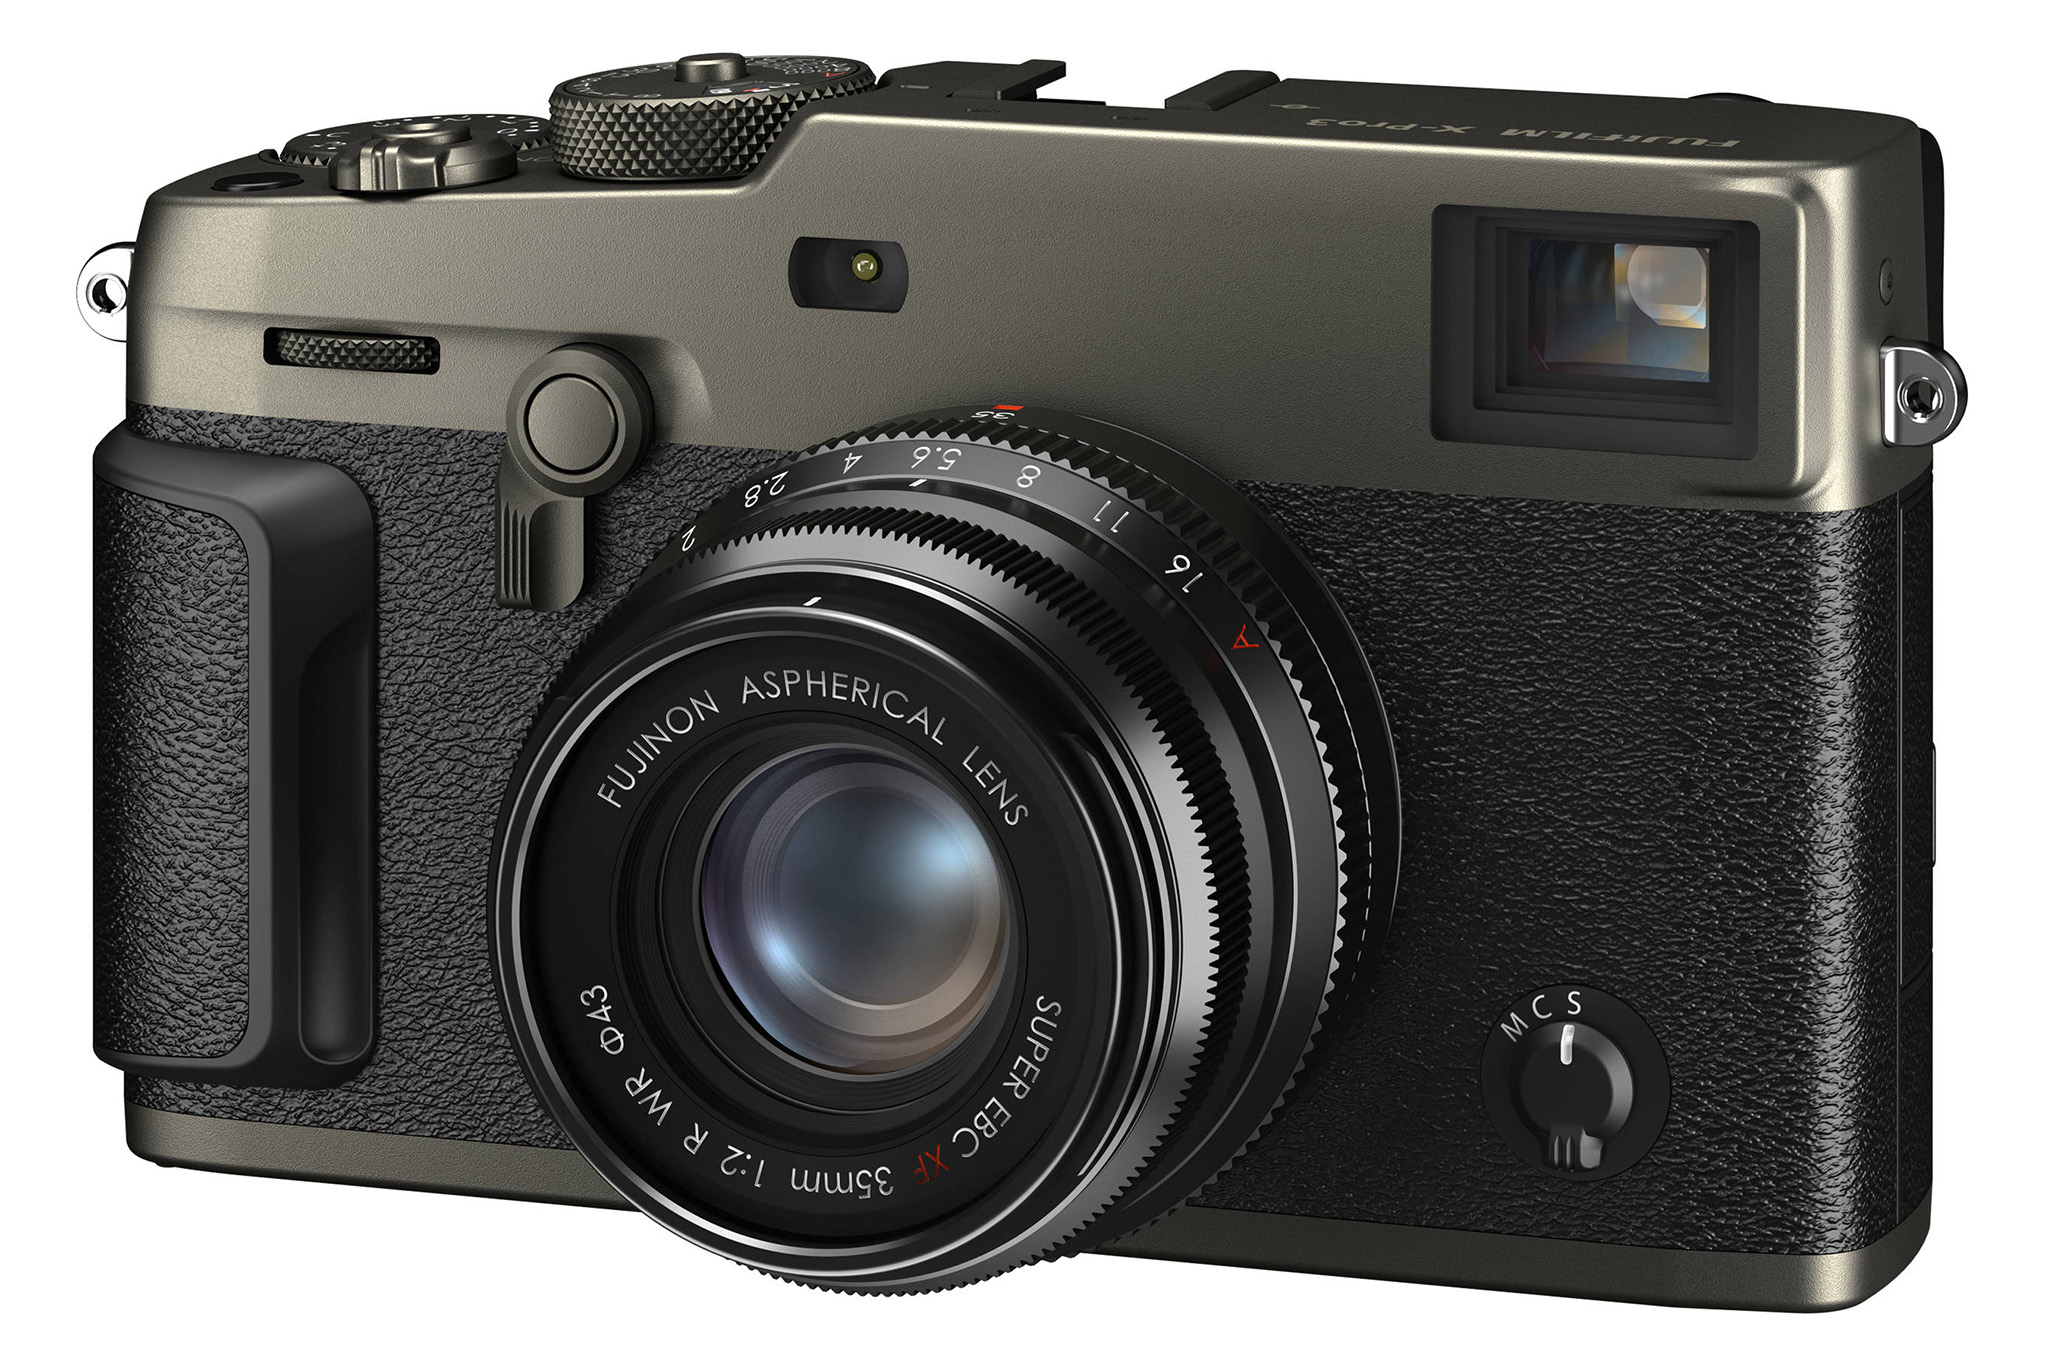 Opknappen intern sleuf Fuji X-Pro3 Announcement - A Street Photographer's Ultimate Camera or Just  Another Gimmick?